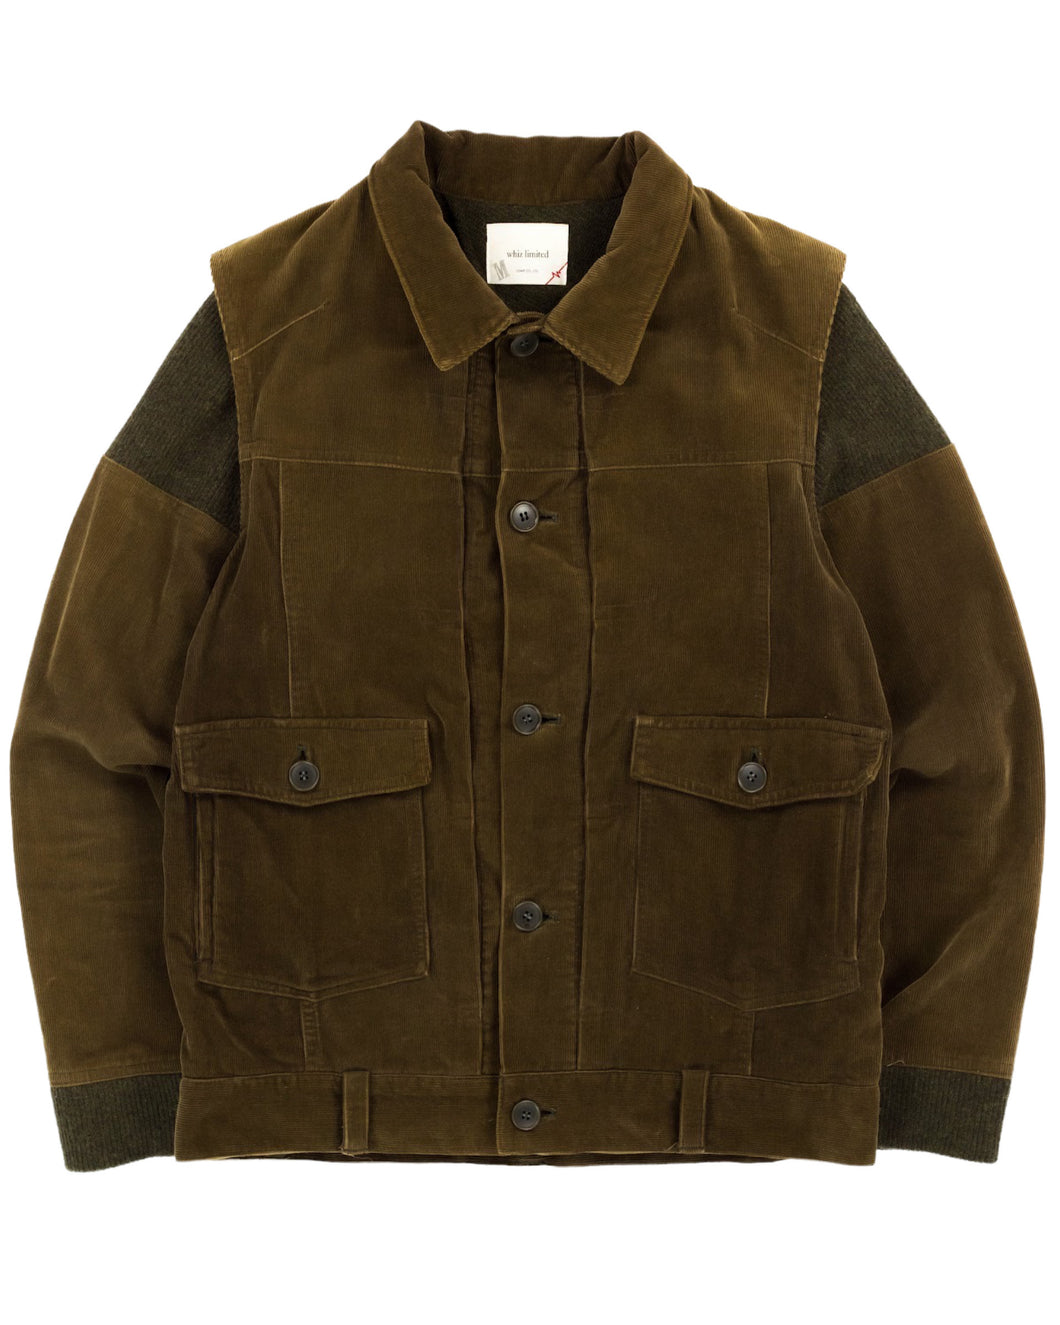 WHIZ Pleated Corduroy Truck Jacket w/ Articulated Knit Shoulders (AW 2003)(S-Slim M)